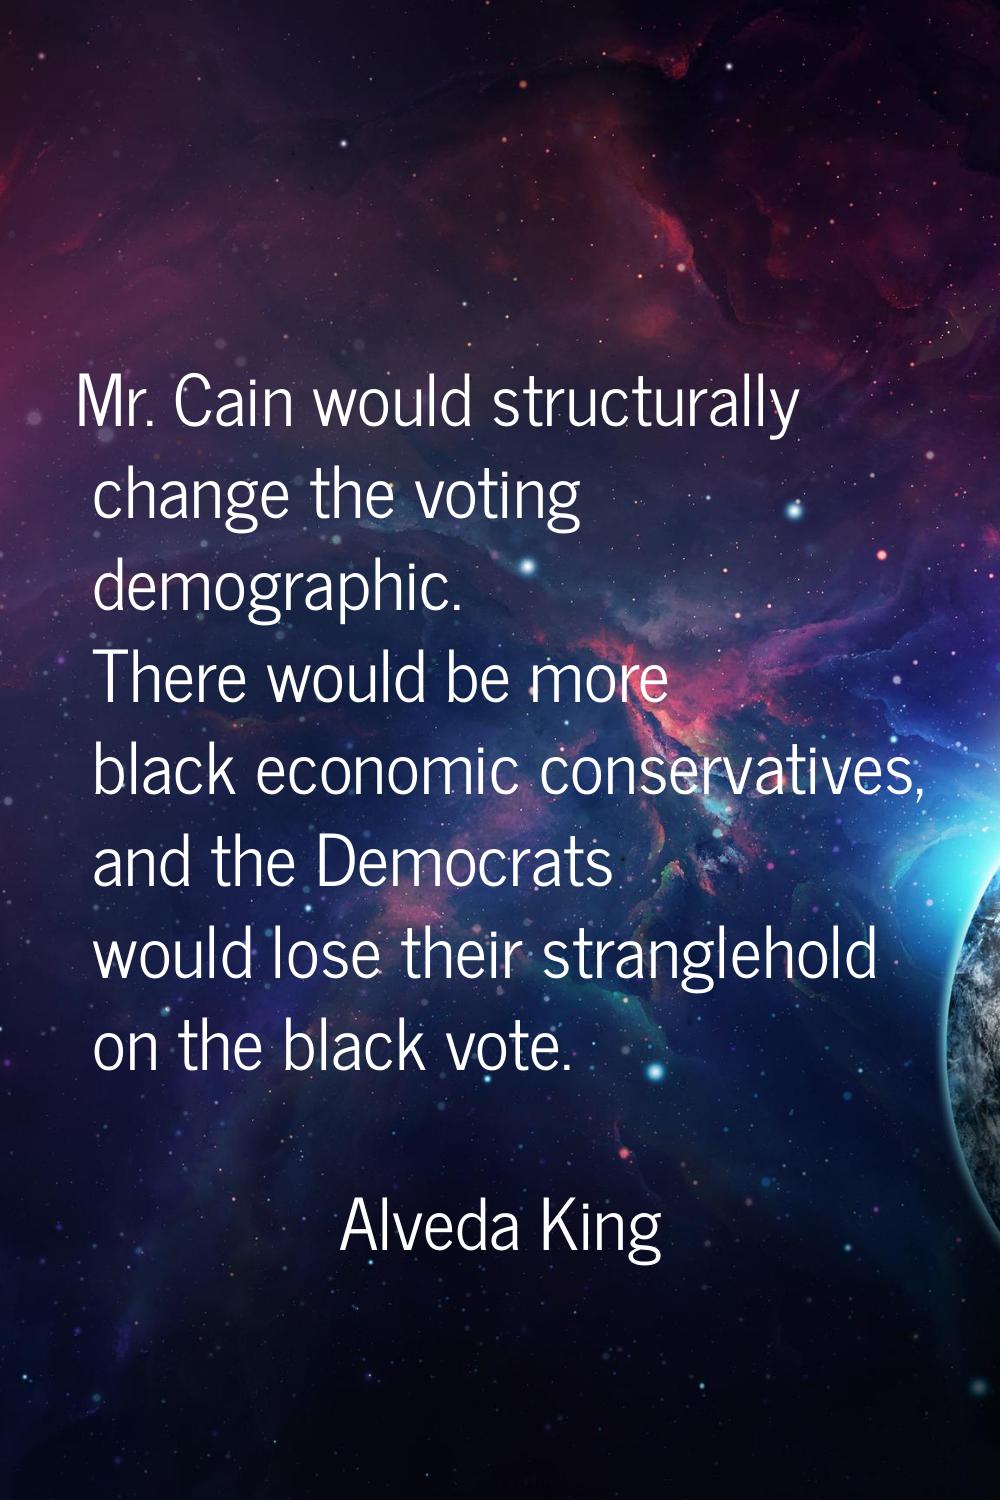 Mr. Cain would structurally change the voting demographic. There would be more black economic conse